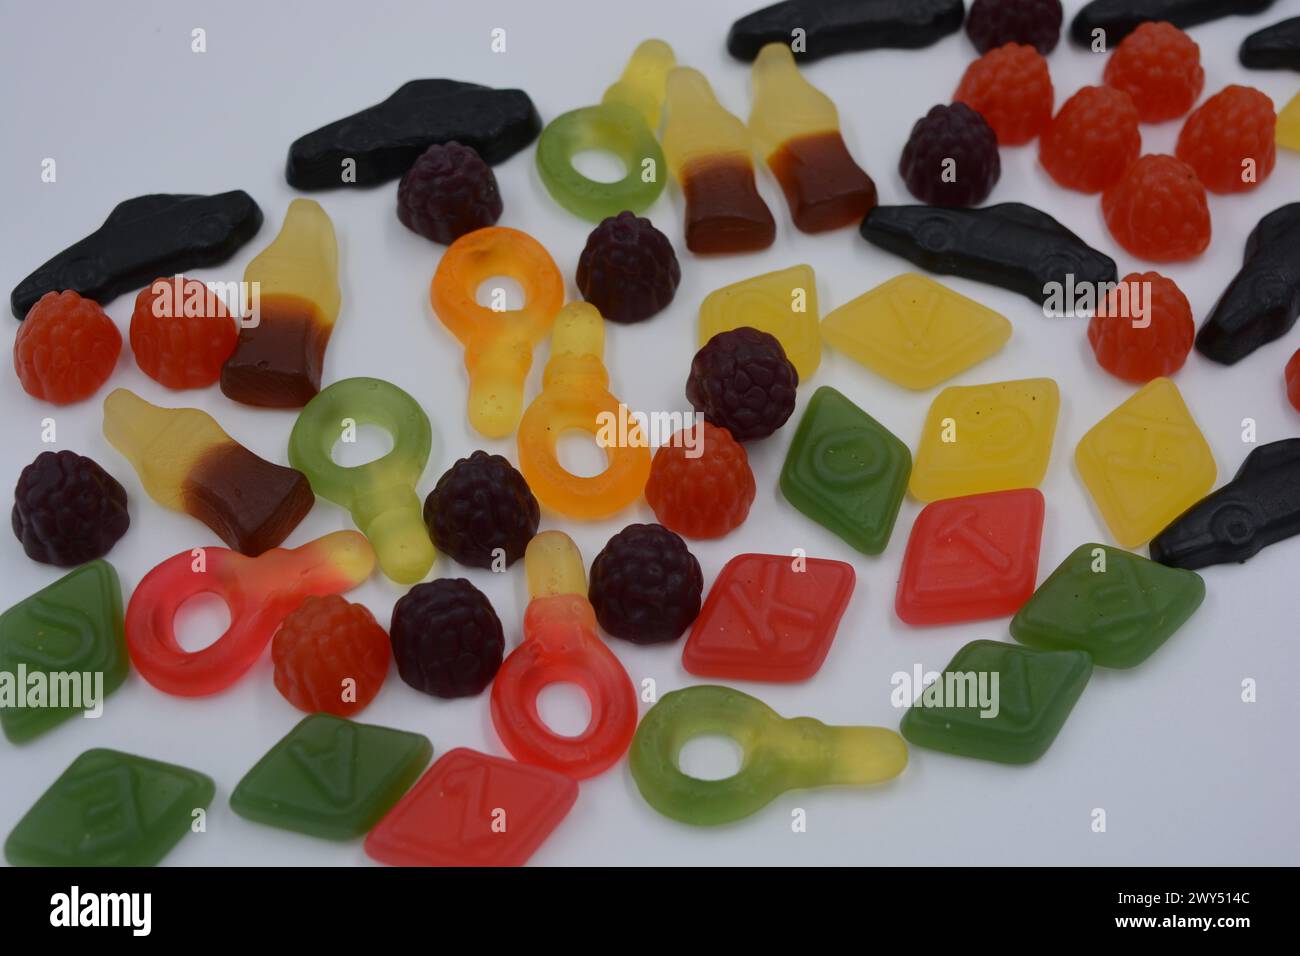 Candies in the form of a black car, raspberries, blackberries, cola bottles, colored keys, diamonds with the alphabet. Stock Photo